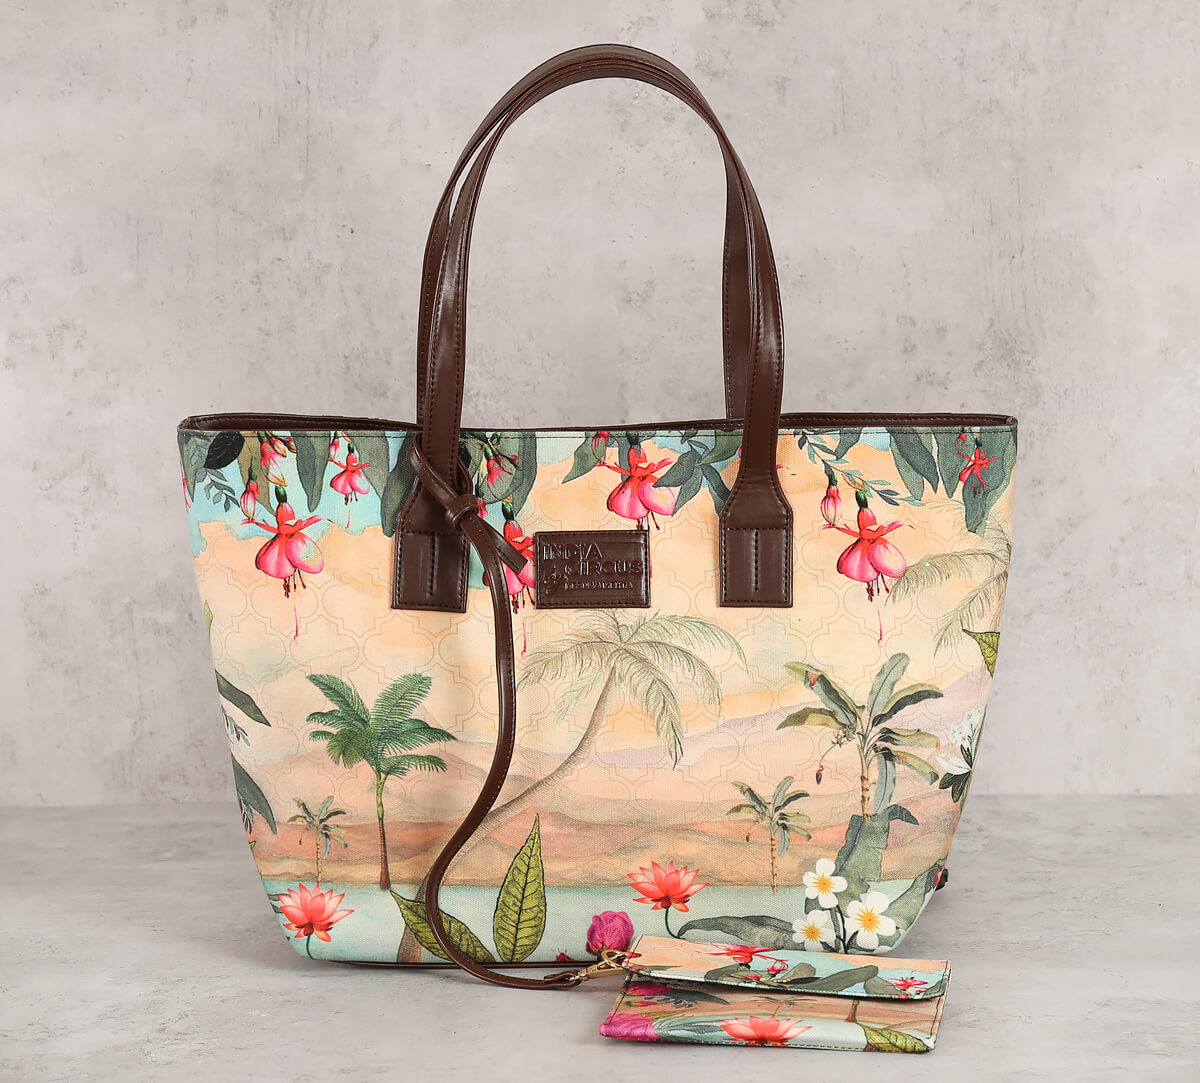 Details more than 60 cotton tote bags india best - in.cdgdbentre